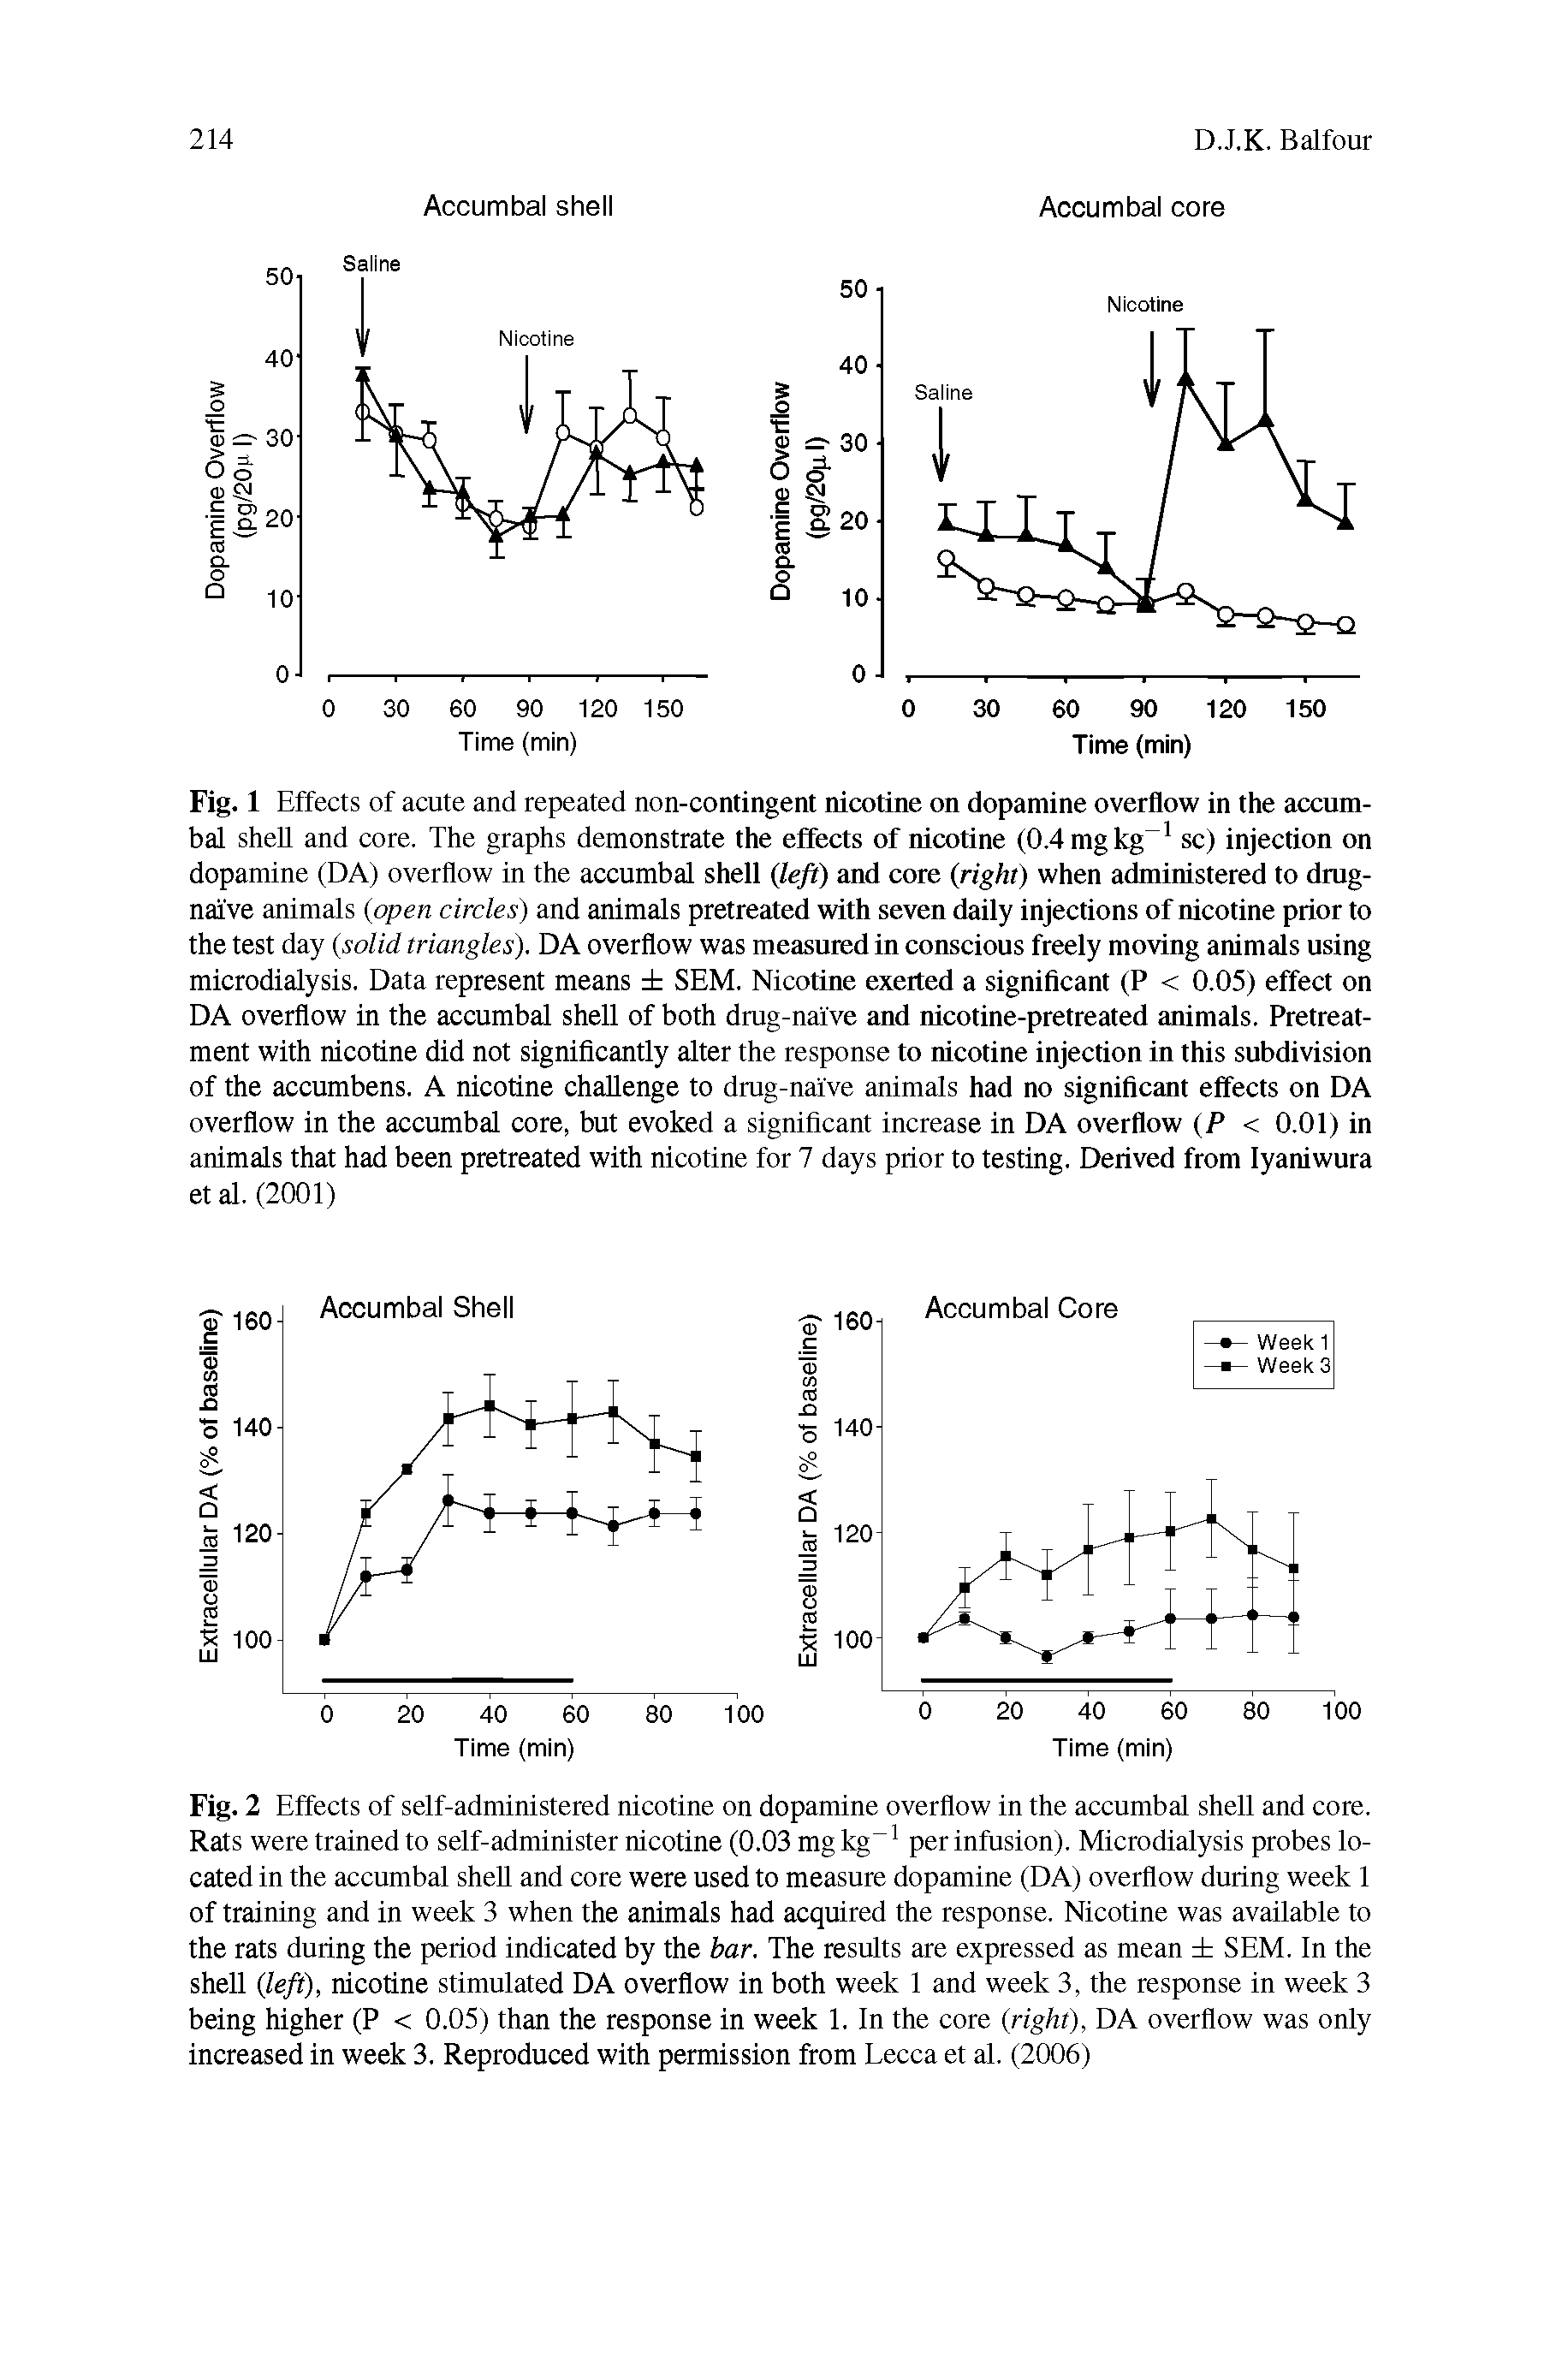 Fig. 2 Effects of self-administered nicotine on dopamine overflow in the accumbal shell and core. Rats were trained to self-administer nicotine (0.03 mg kg per infusion). Microdialysis probes located in the accumbal shell and core were used to measure dopamine (DA) overflow during week 1 of training and in week 3 when the animals had acquired the response. Nicotine was available to the rats during the period indicated by the bar. The results are expressed as mean SEM, In the shell (left), nicotine stimulated DA overflow in both week 1 and week 3, the response in week 3 being higher (P < 0.05) than the response in week 1. In the core (right), DA overflow was only increased in week 3. Reproduced with permission from Lecca et al, (2006)...